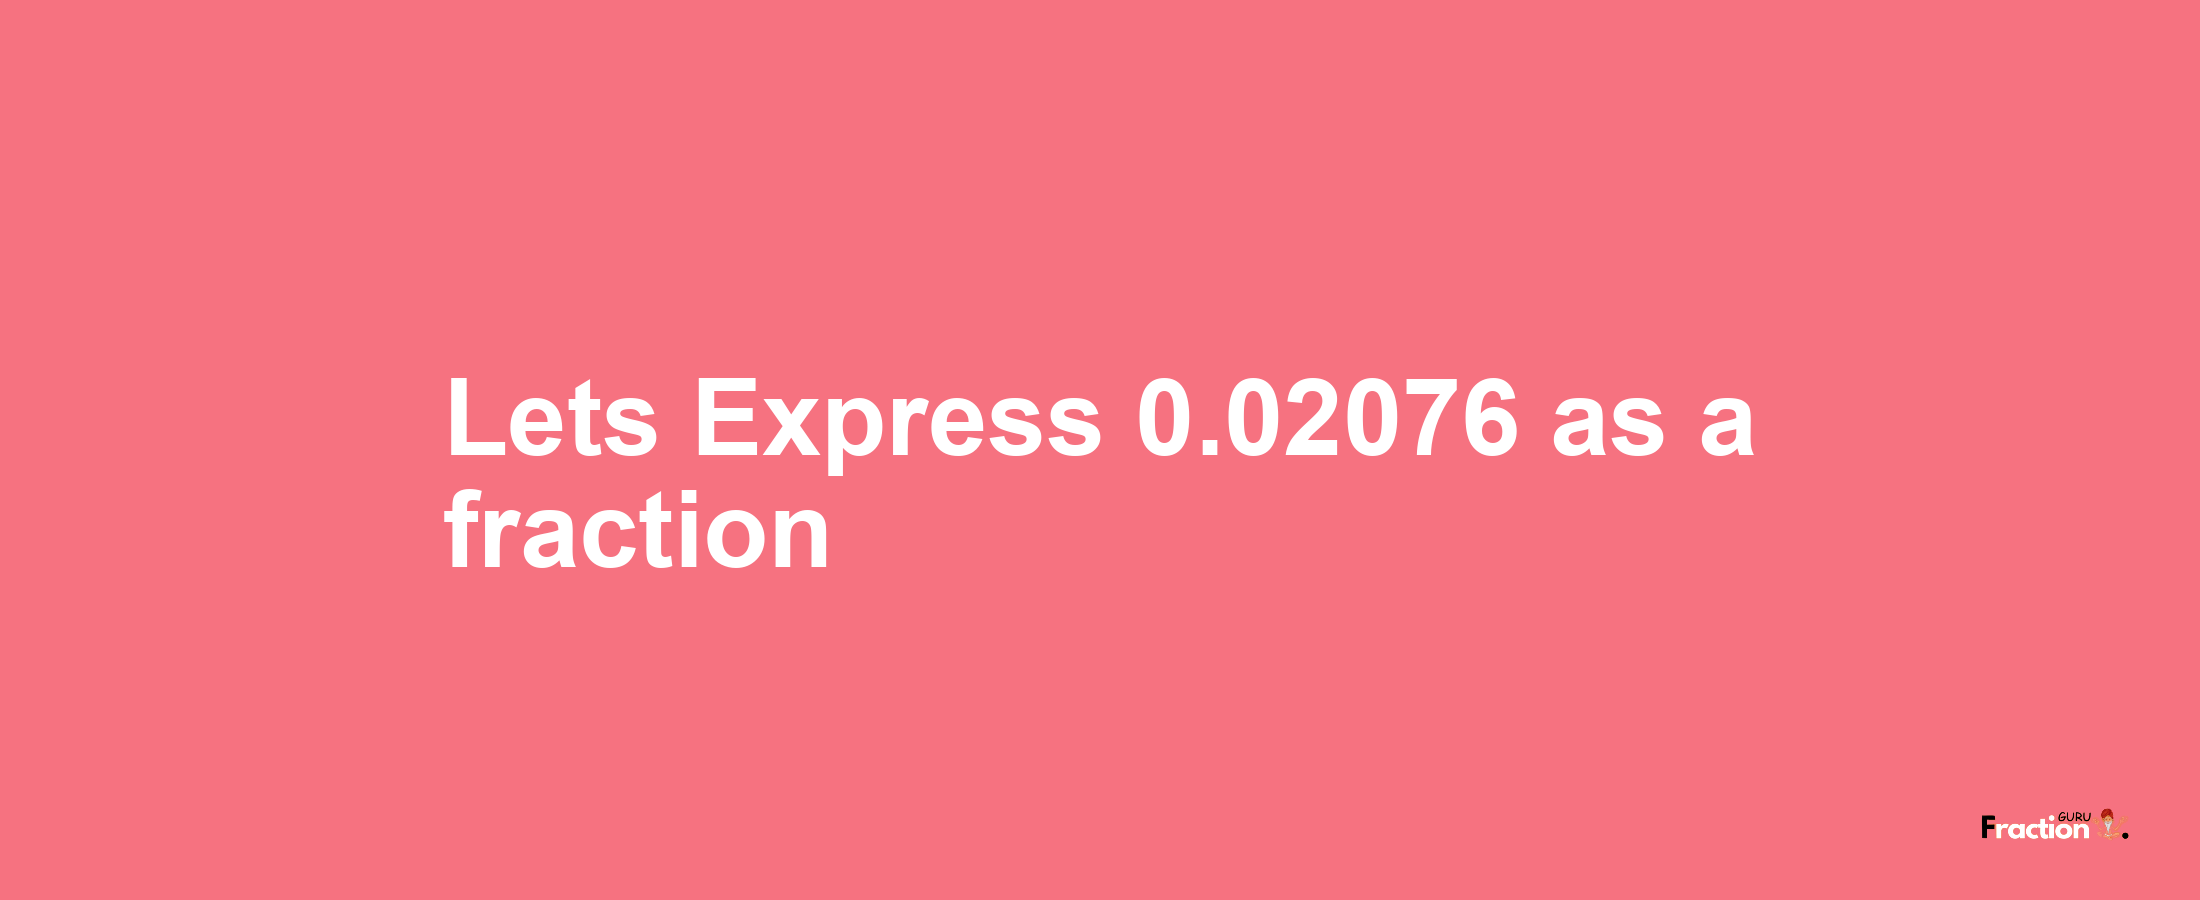 Lets Express 0.02076 as afraction